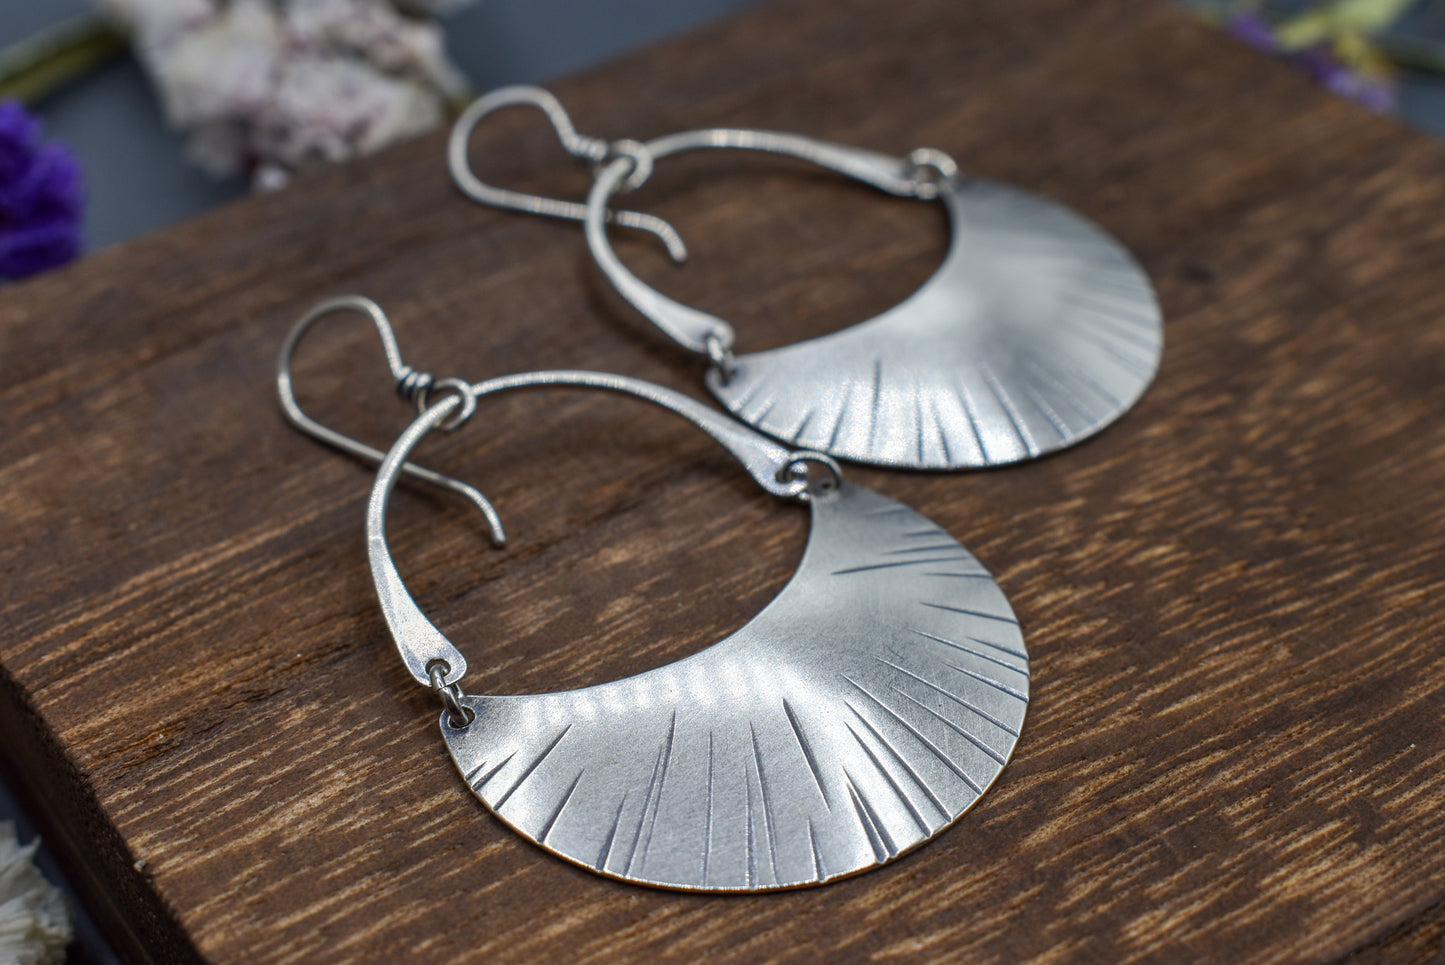 Dashed Crescent Moon Earrings, Silver